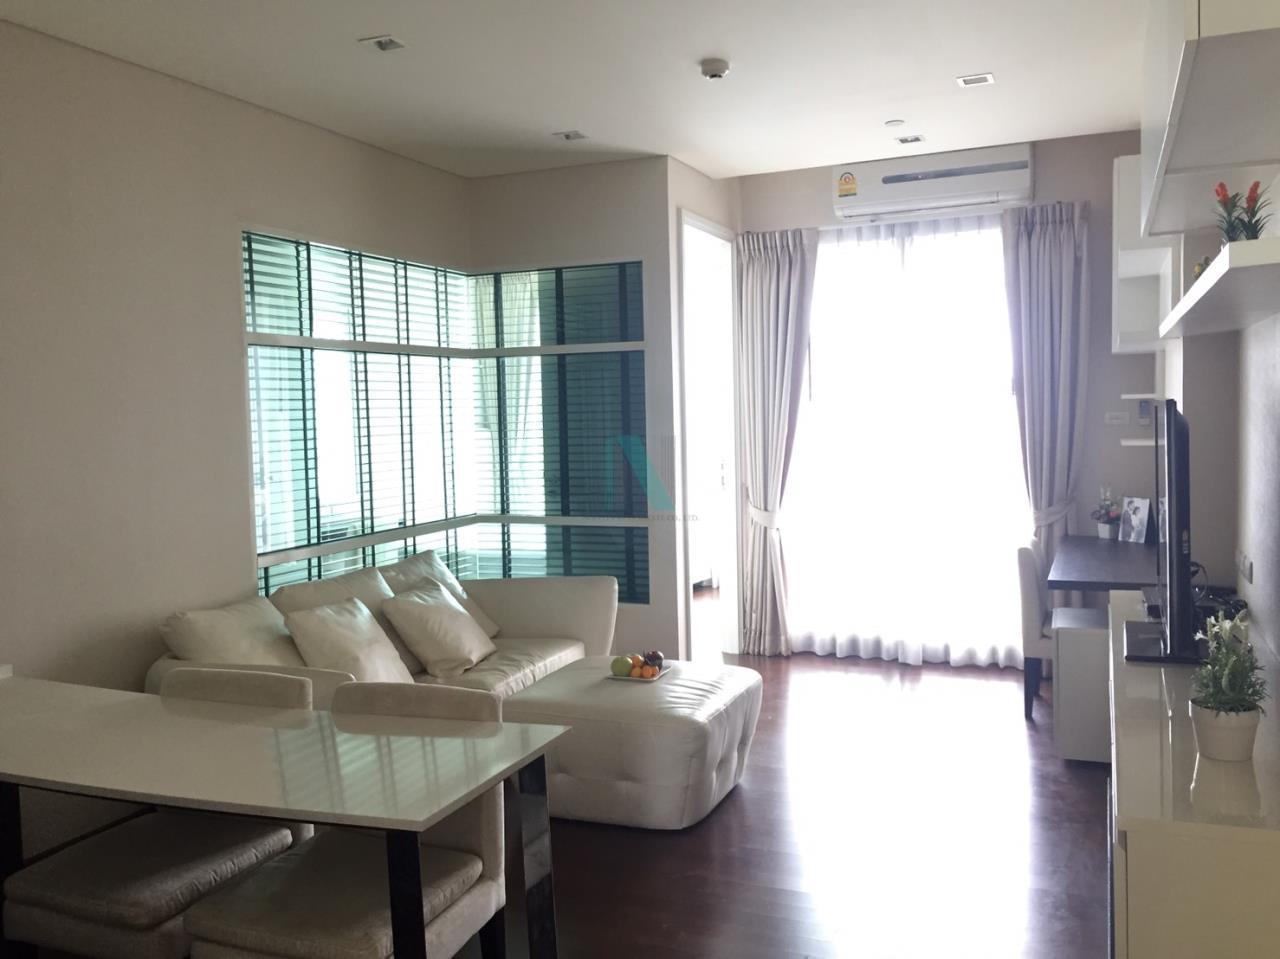 For Sale IVY THONGLOR 4315 sqm 7th floor 1 bedroom project near IVY BTS, ภาพที่ 4